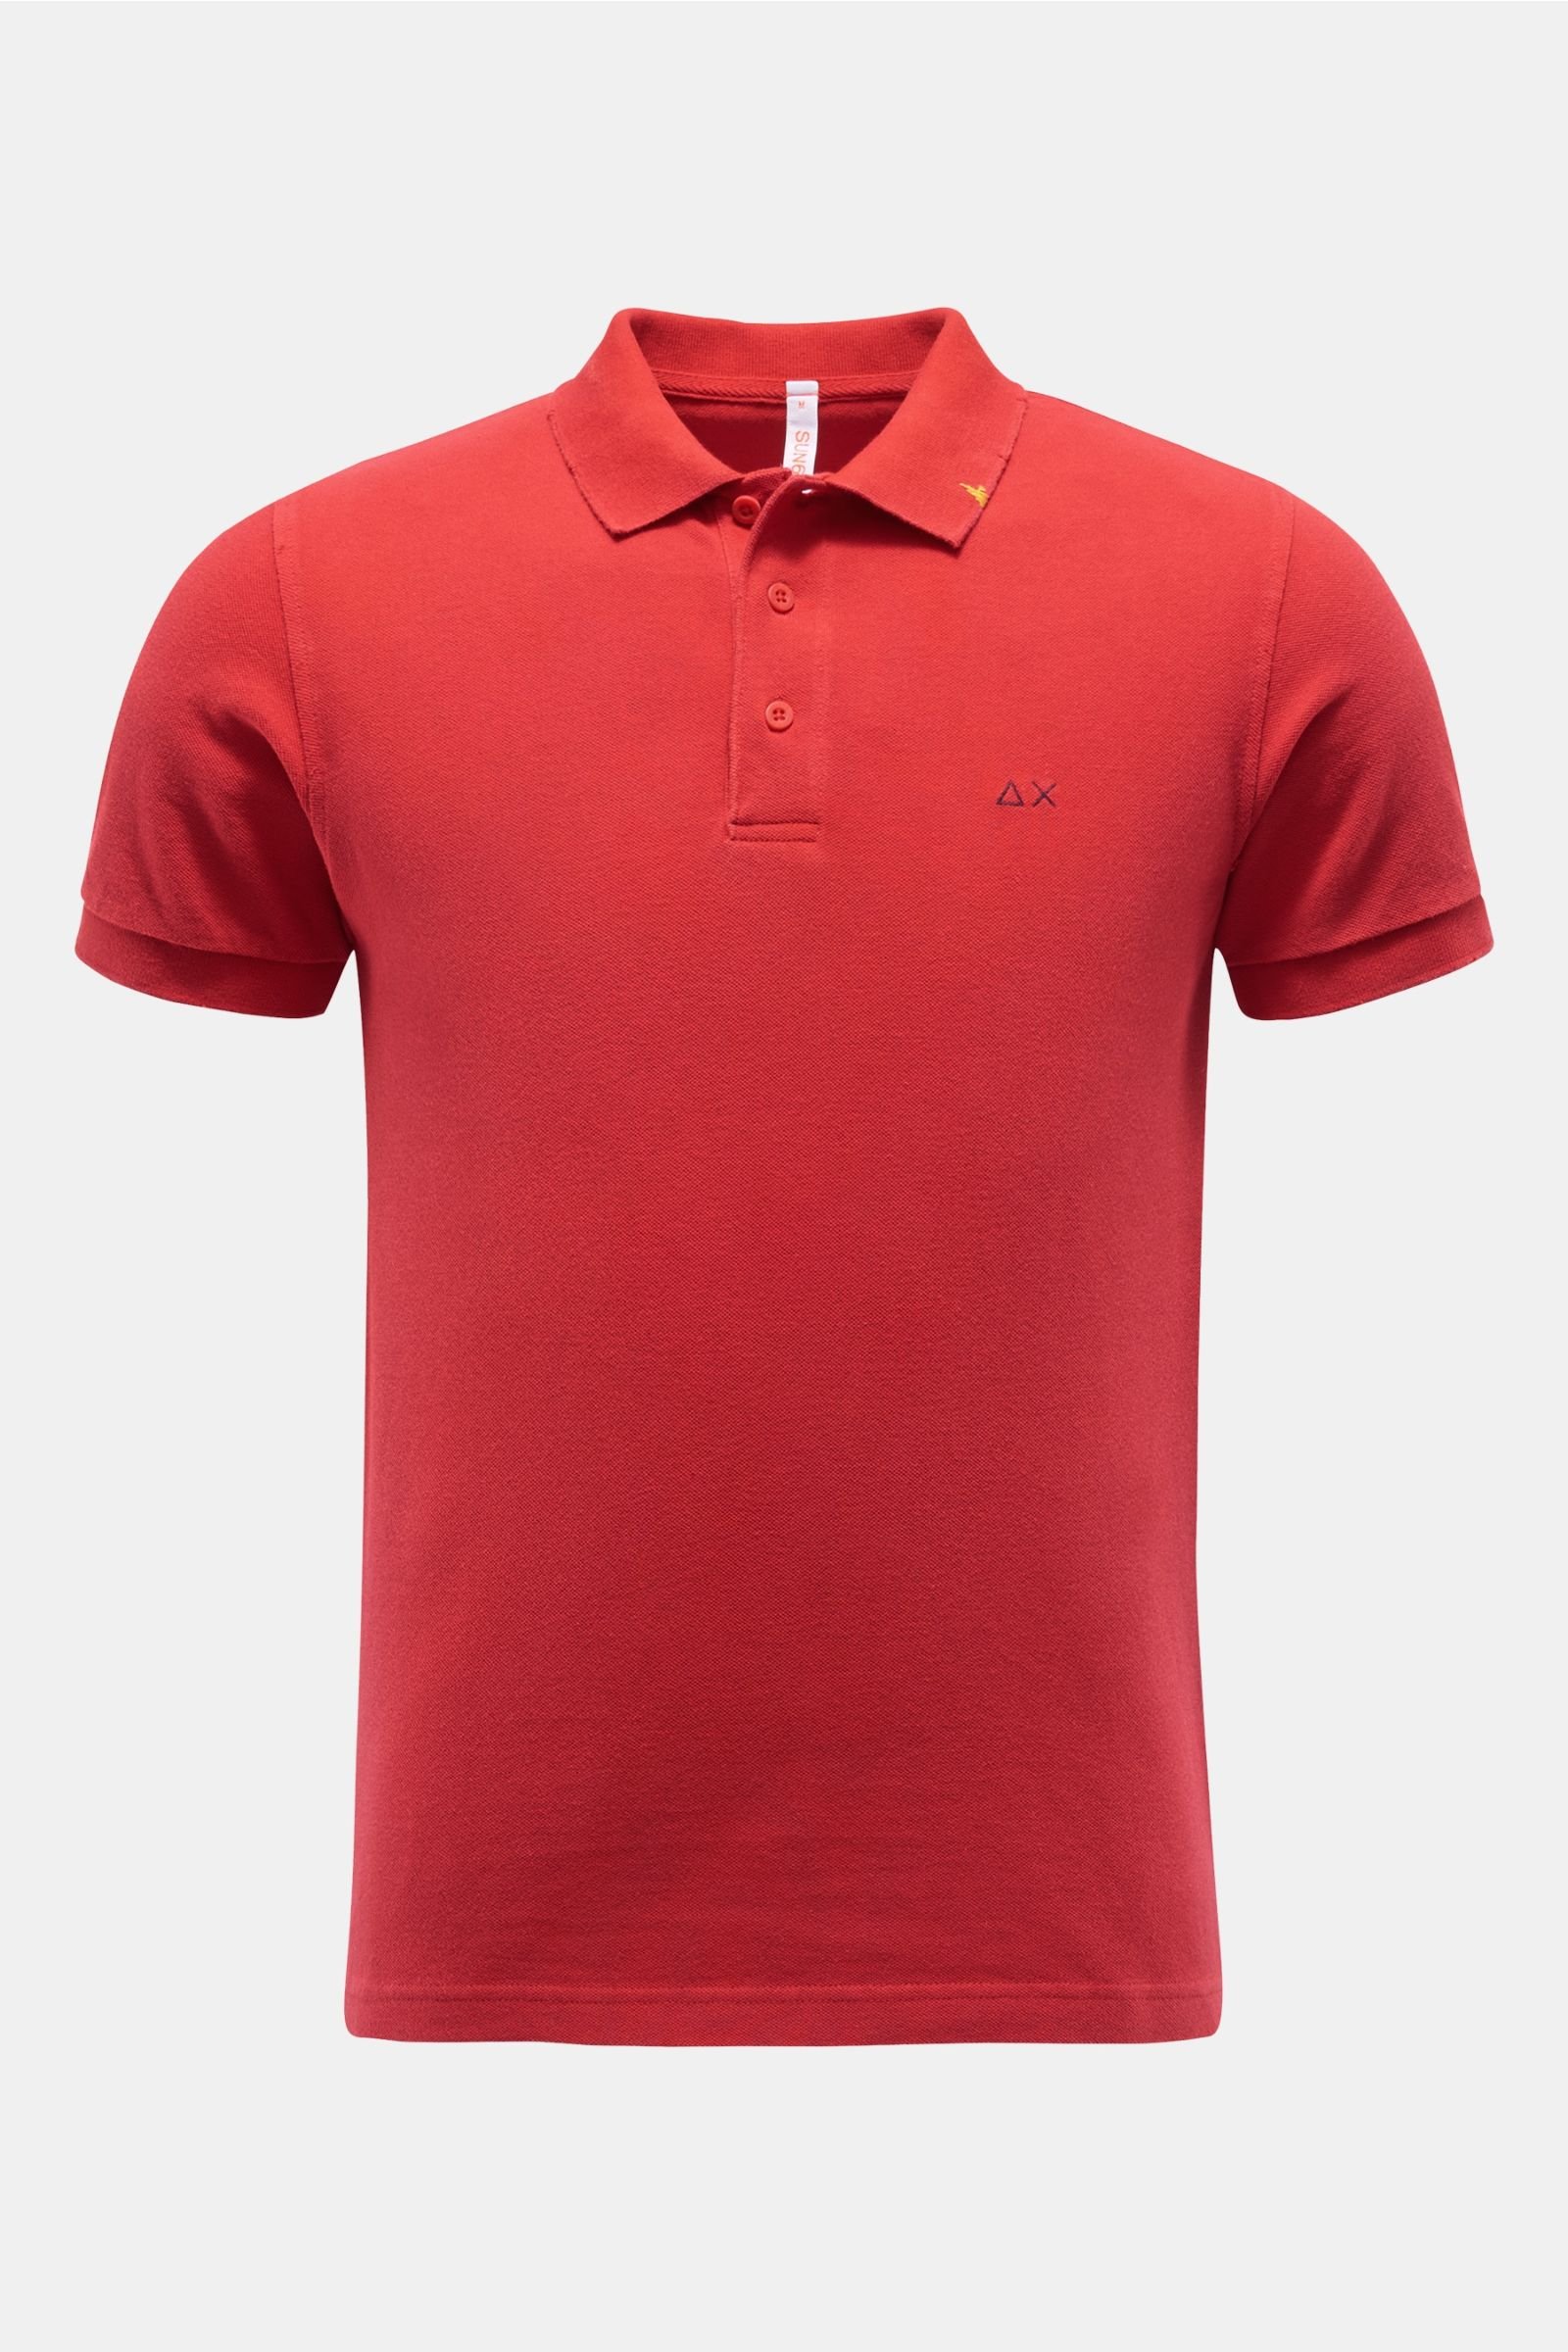 Polo shirt red